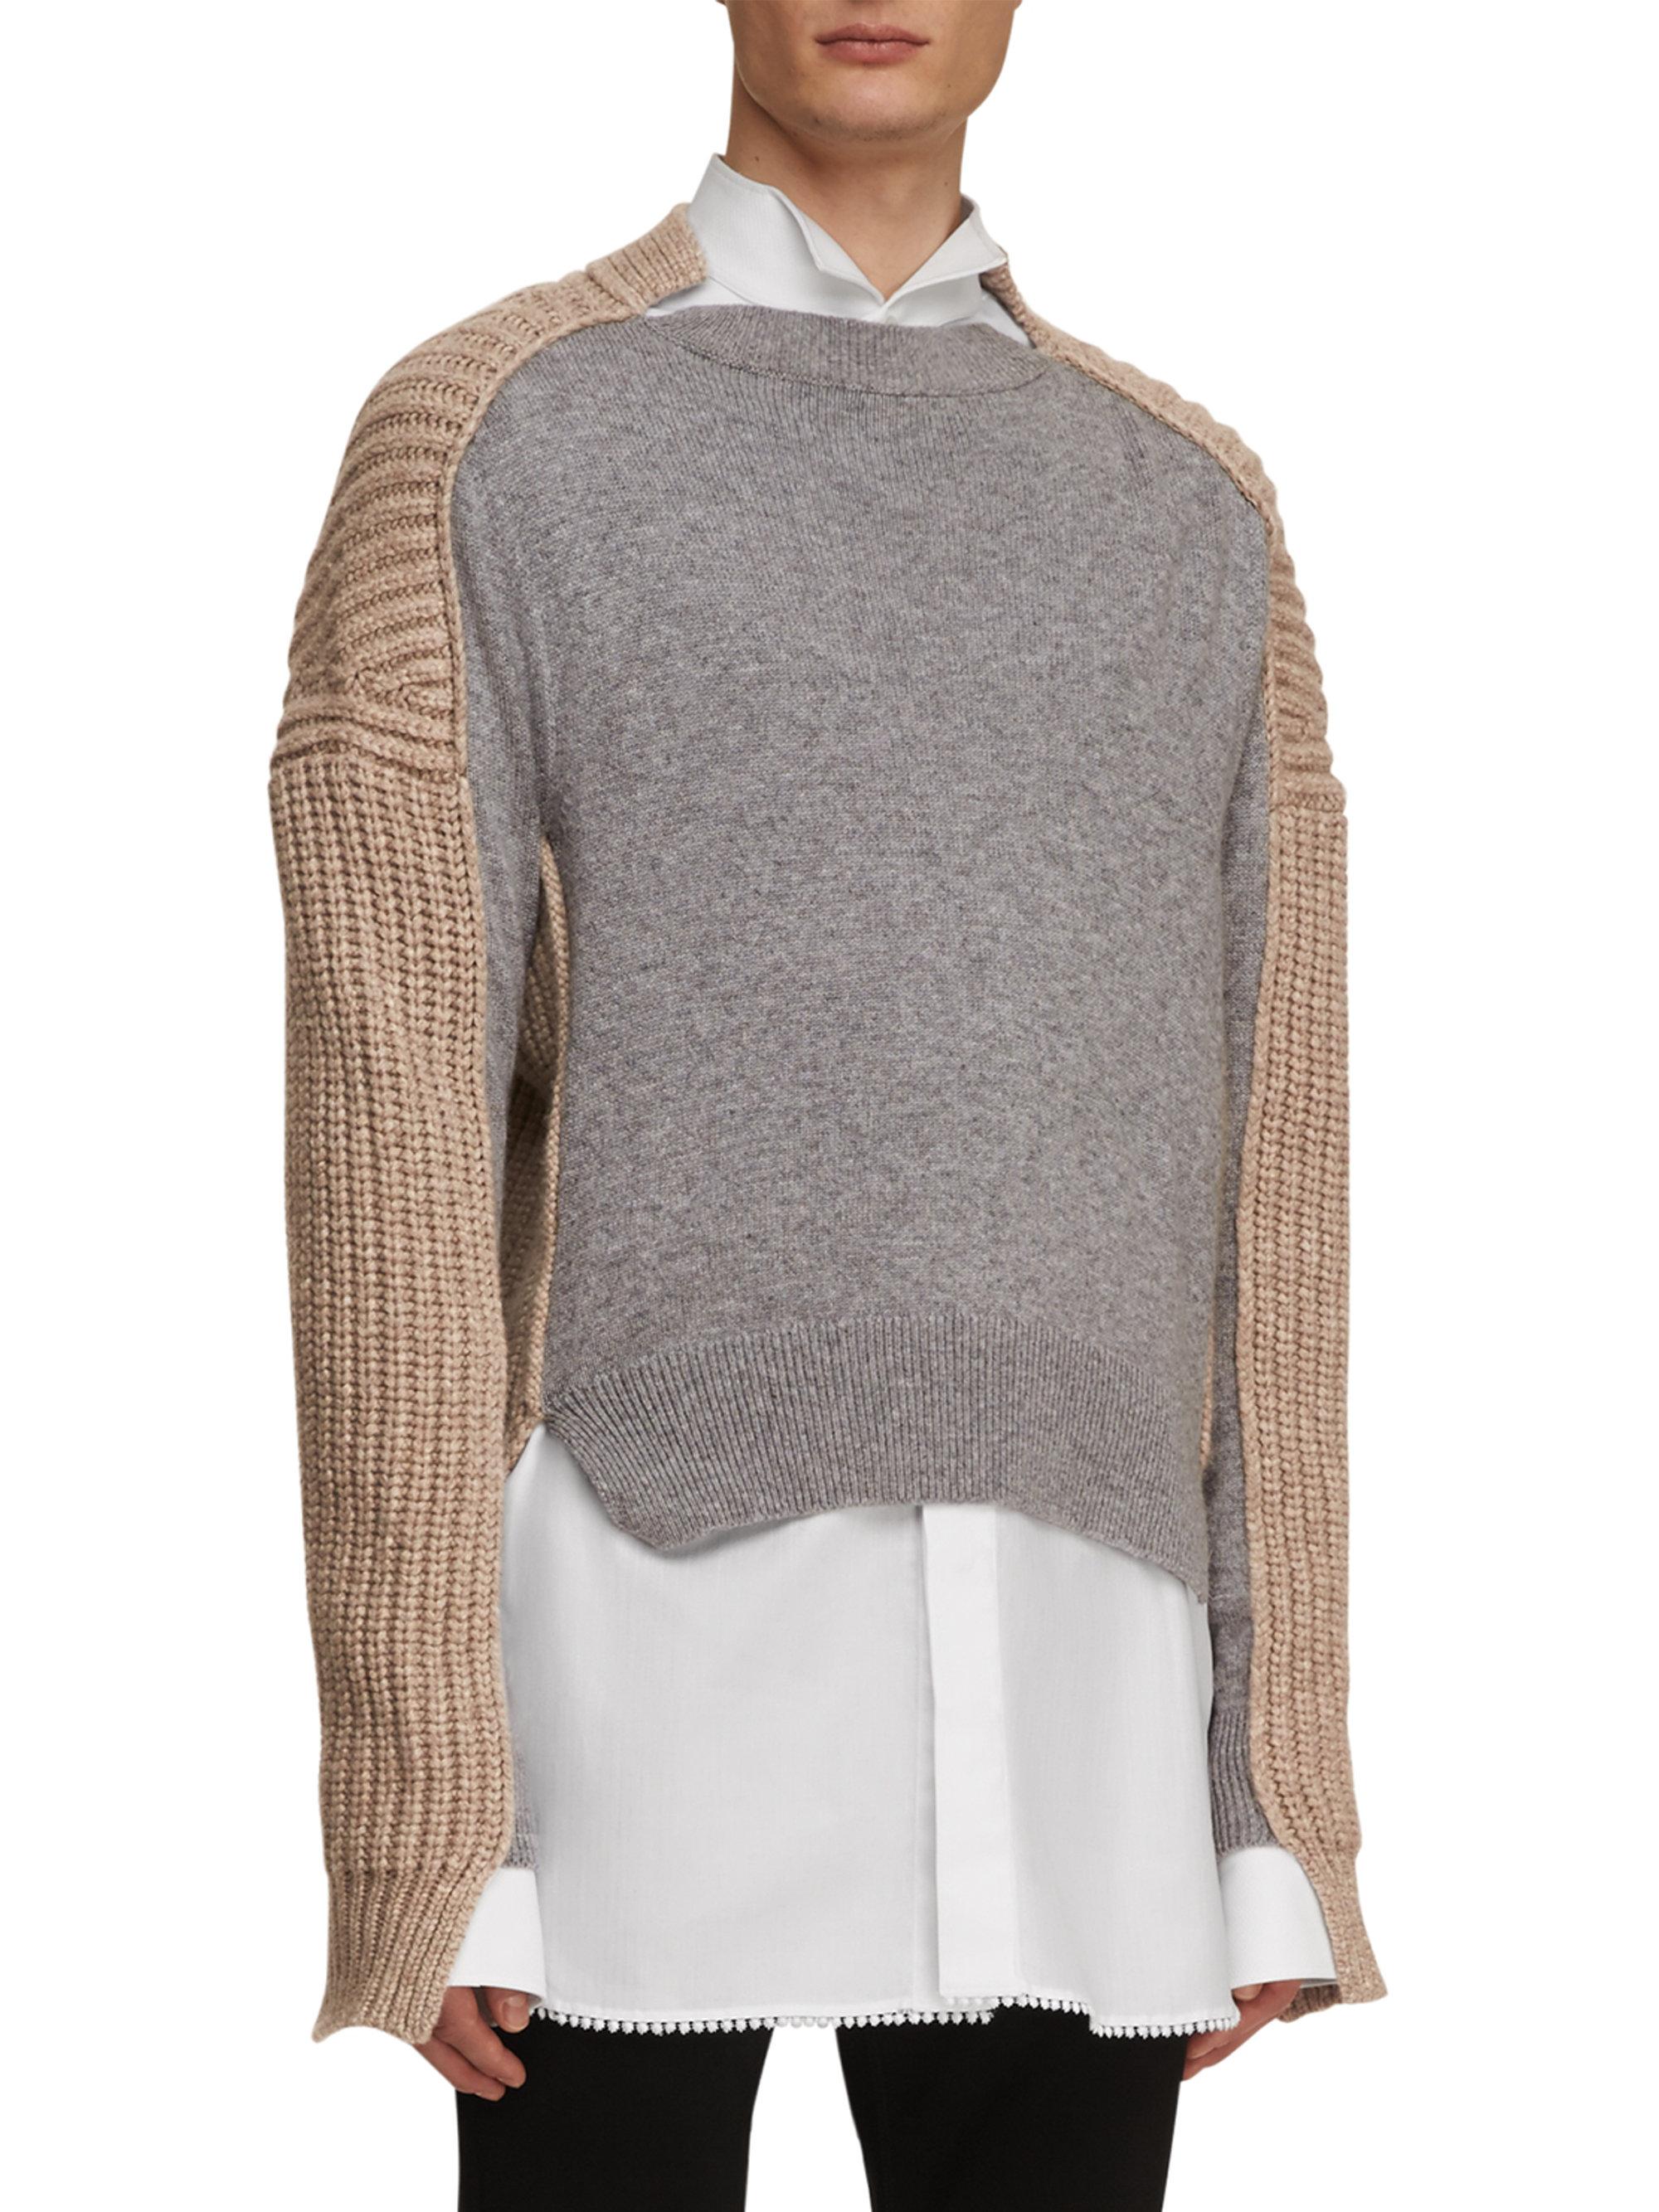 Lyst - Burberry Paneled Cashmere Fisherman Sweater in Gray for Men